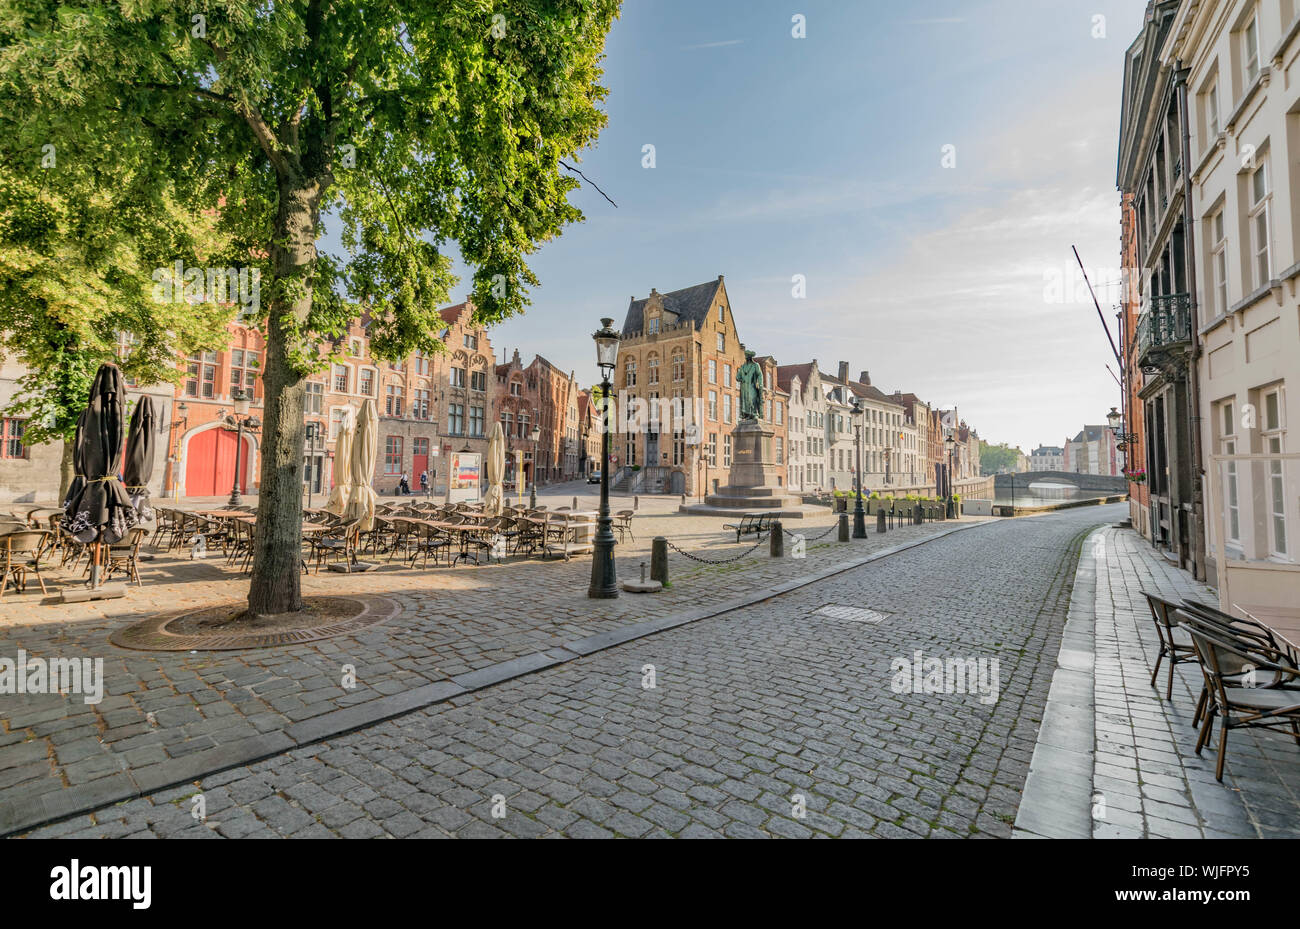 Cobblestone street, the Jan Van Eyck Monument and square, and rows of historic houses on either side of a canal in Bruges, Belgium Stock Photo